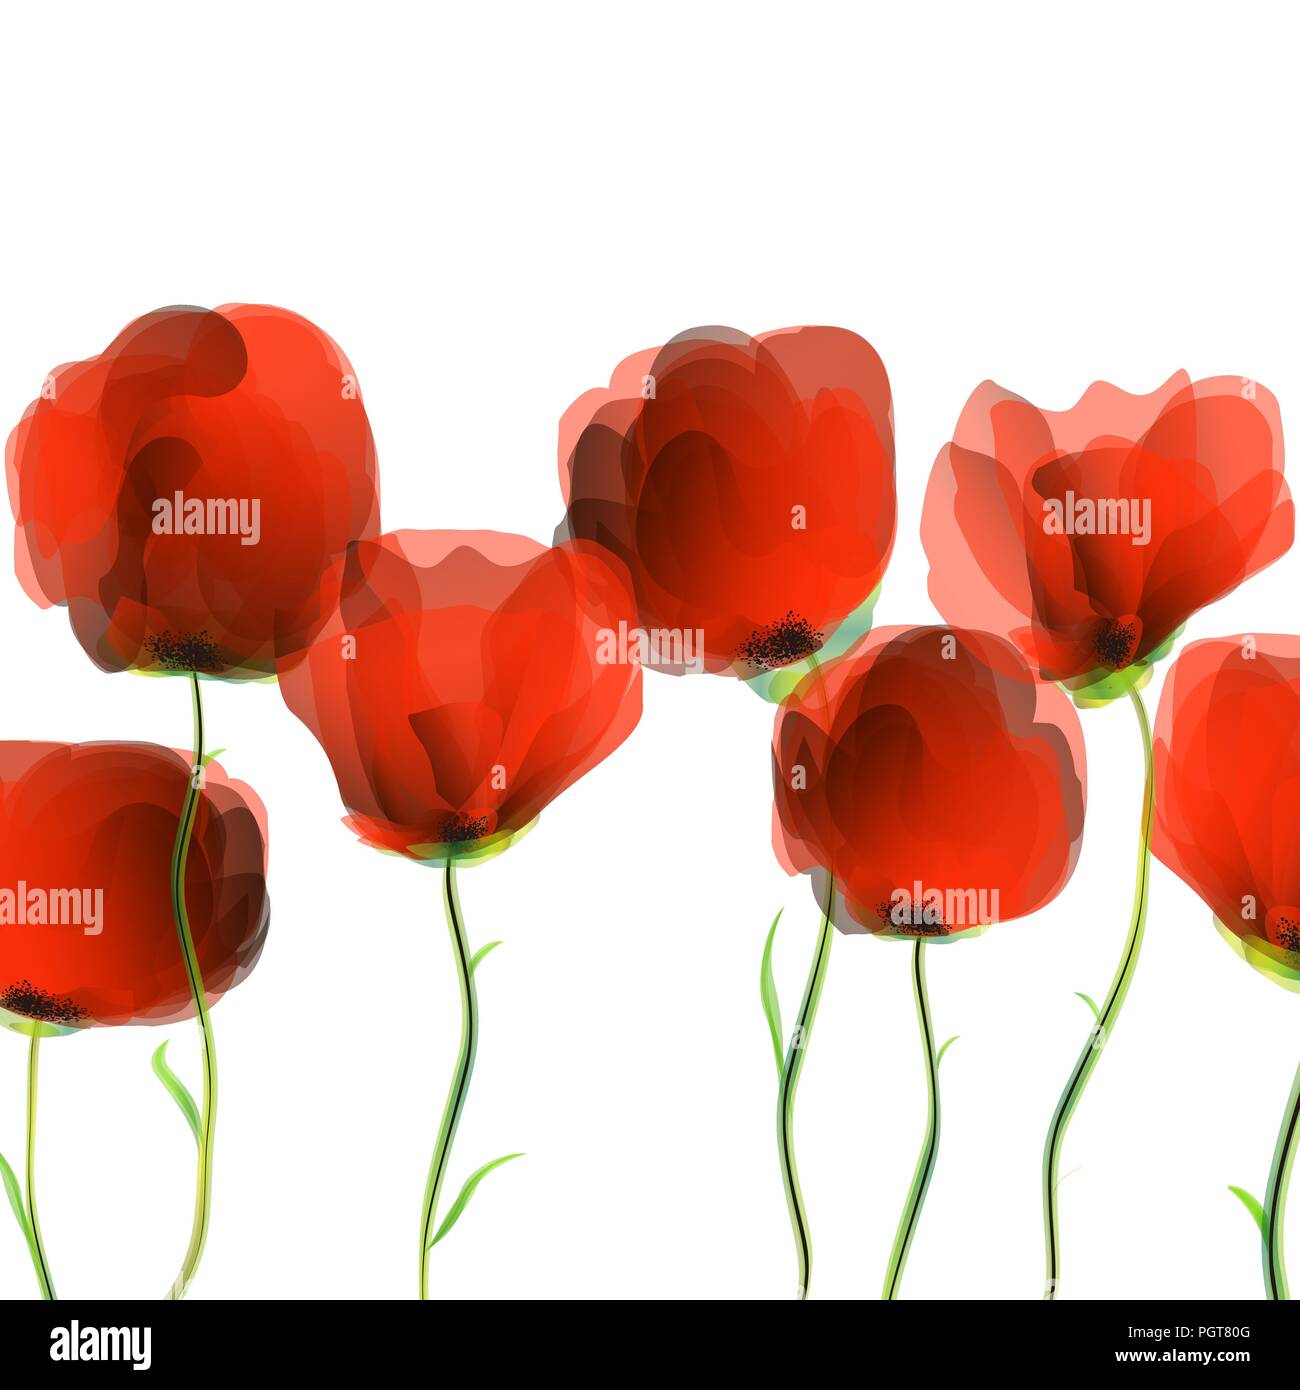 Red poppies row, abstract art illustration Stock Vector